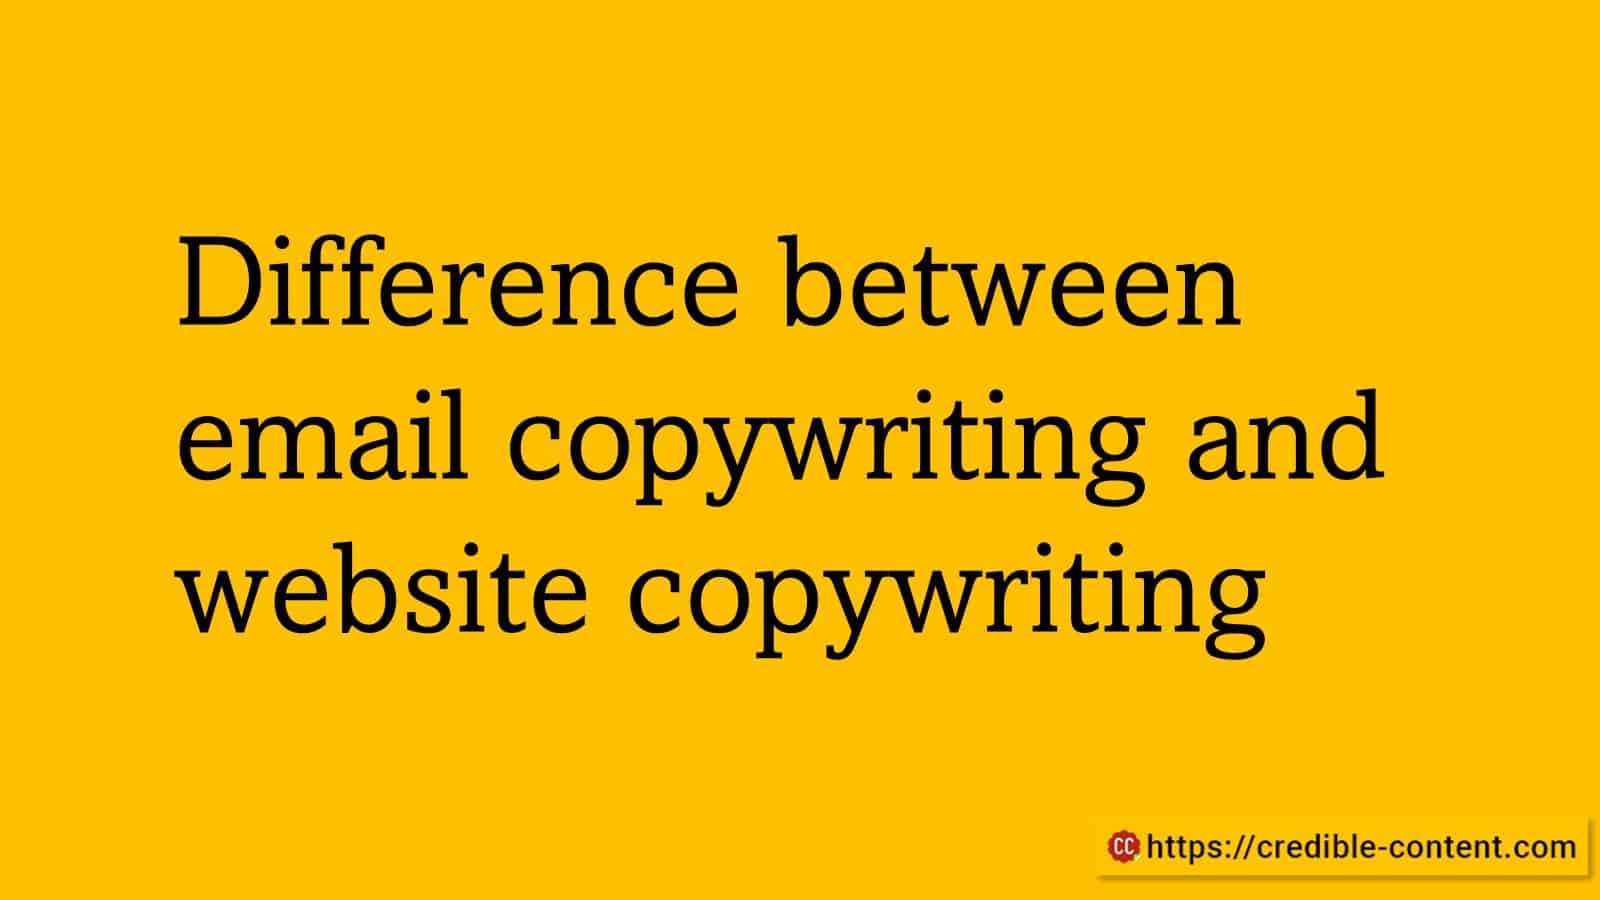 Difference between email and website copywriting